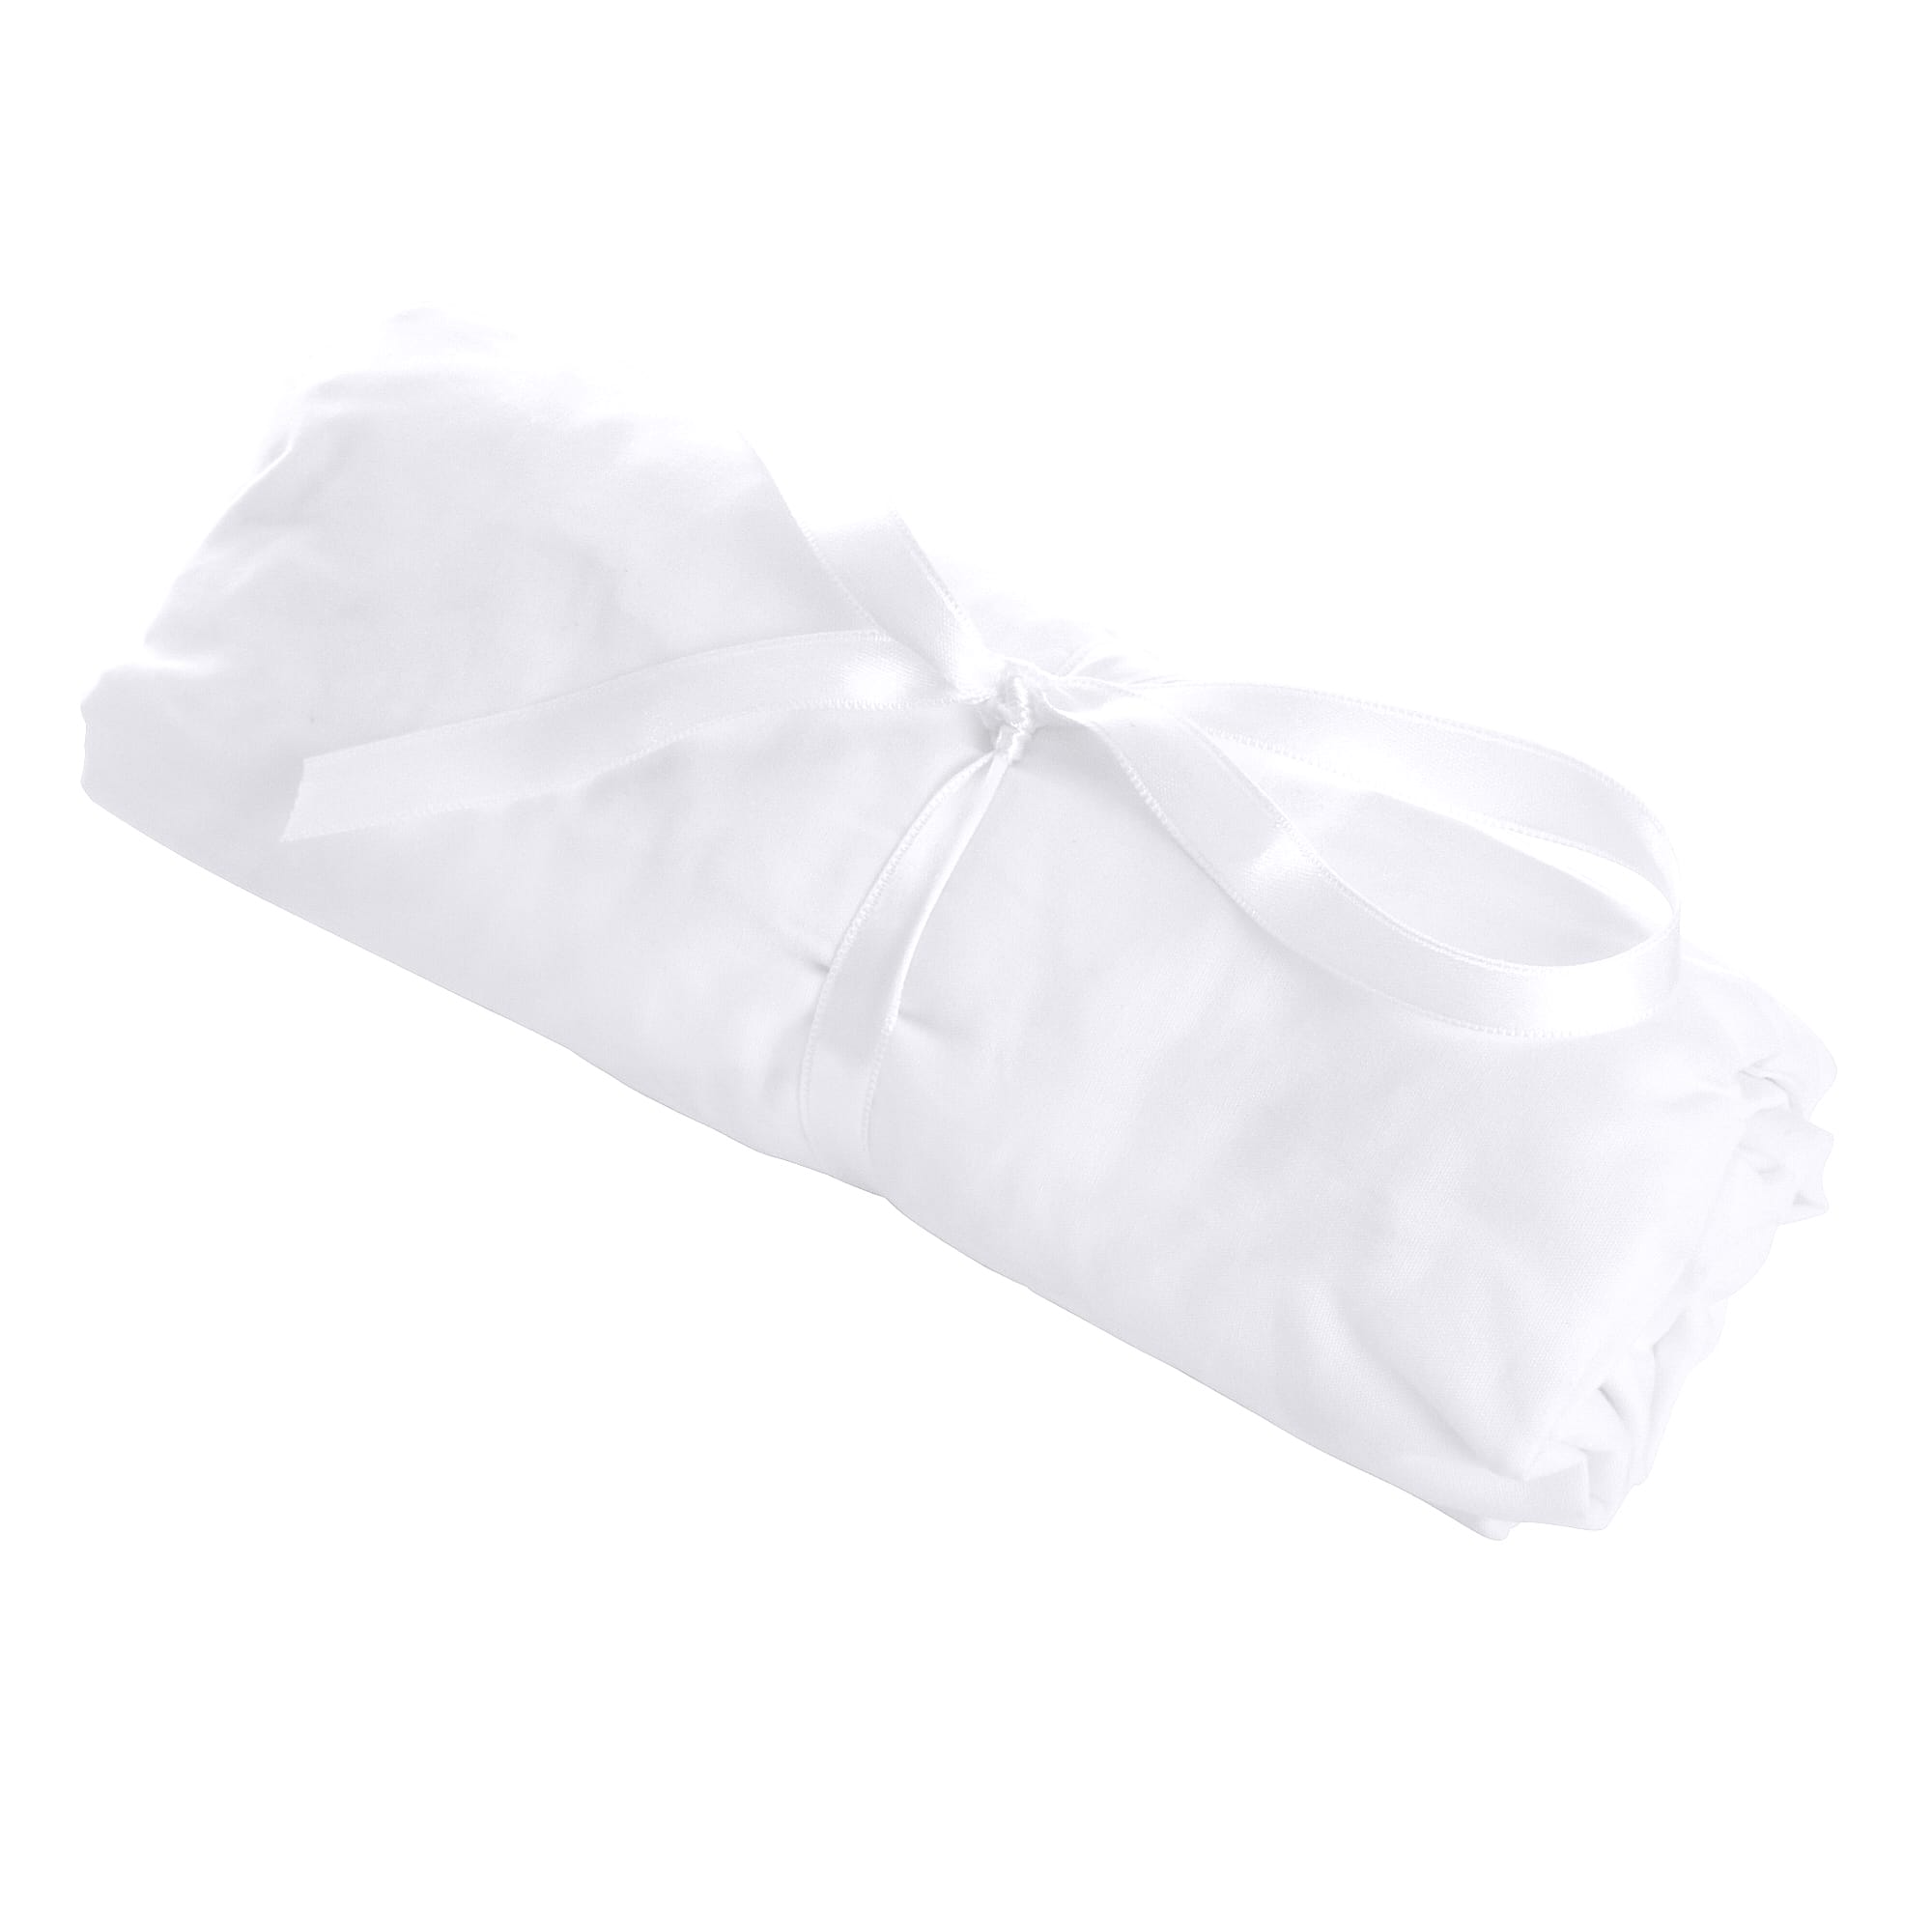 Theophile & Patachou Cot Bed Fitted Sheet 60X120 cm - White